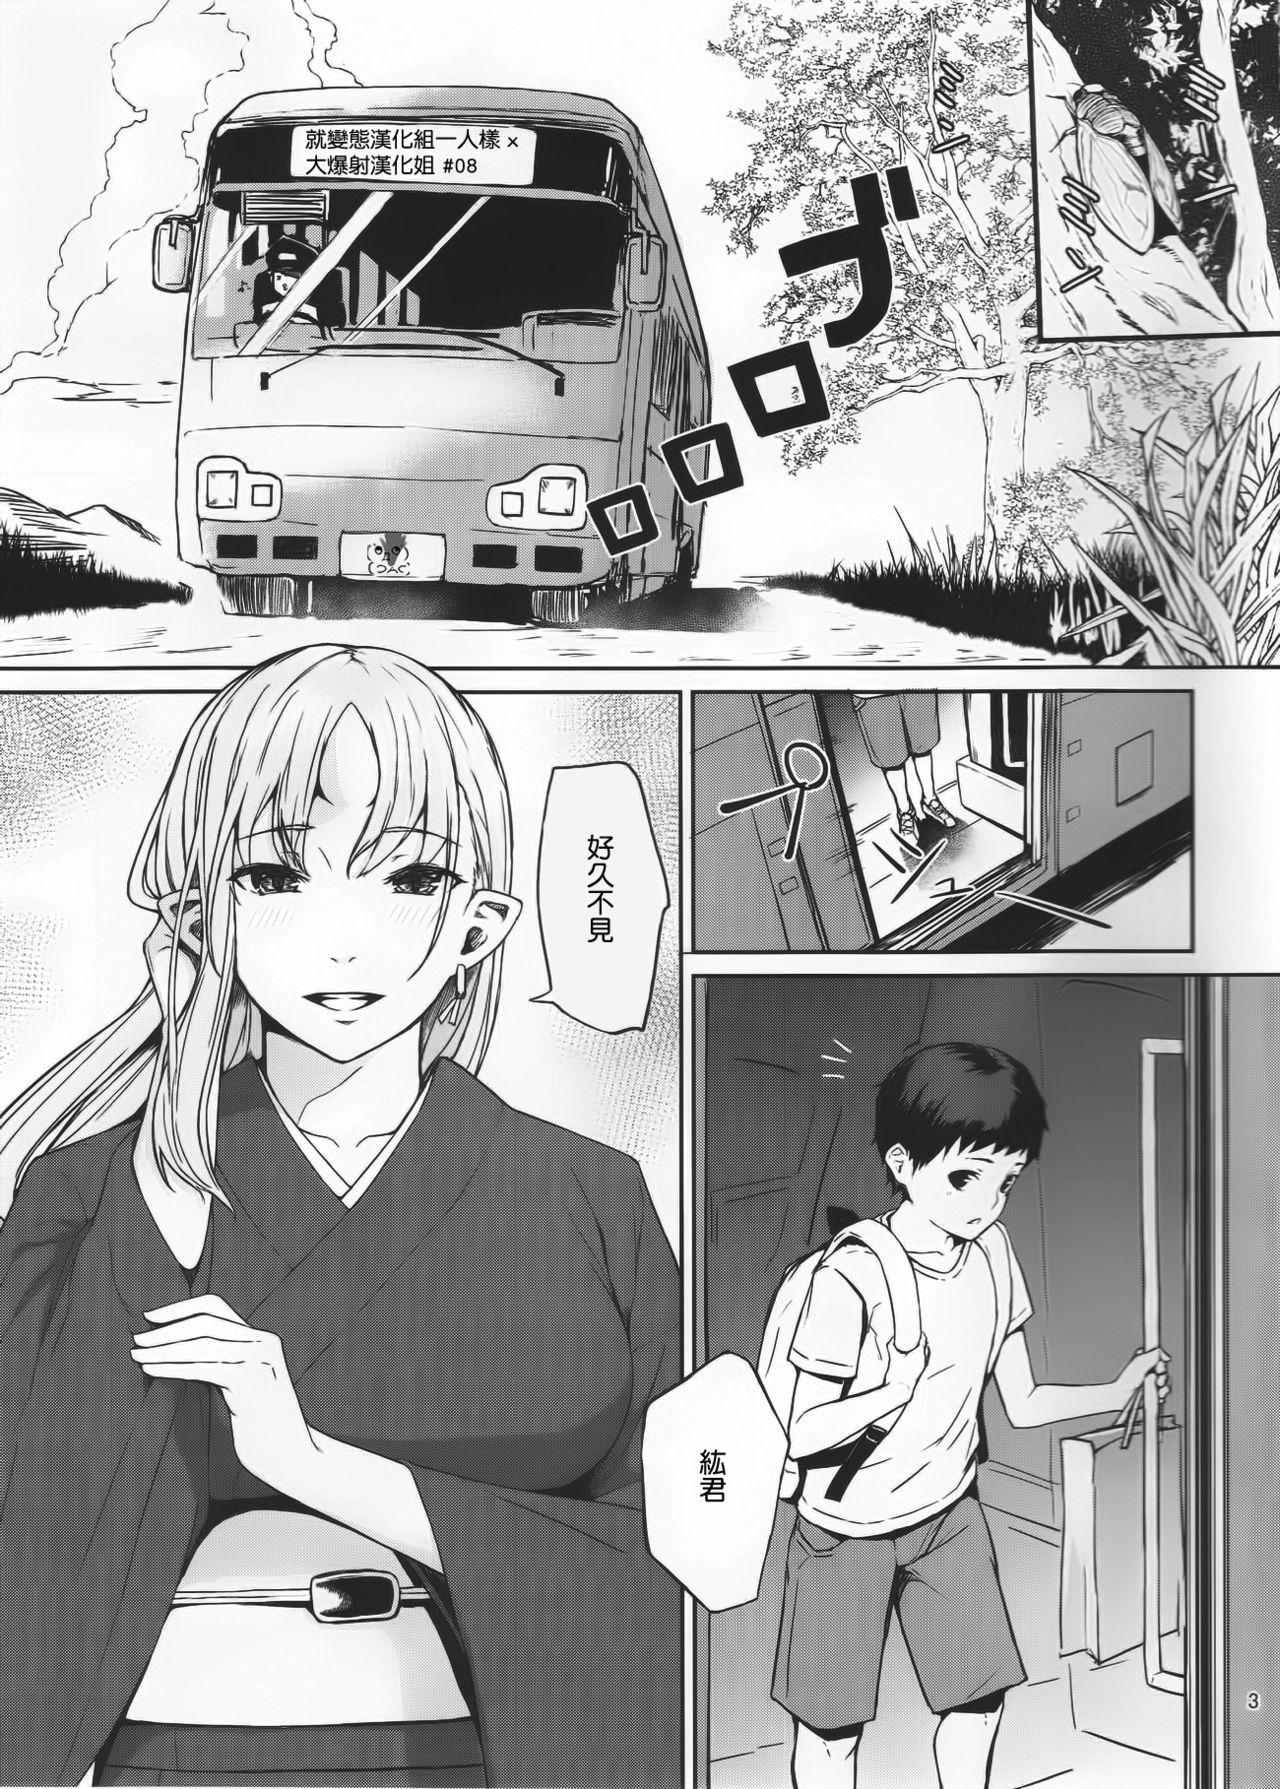 Married Oni no Sumu Ie Gaygroup - Page 2